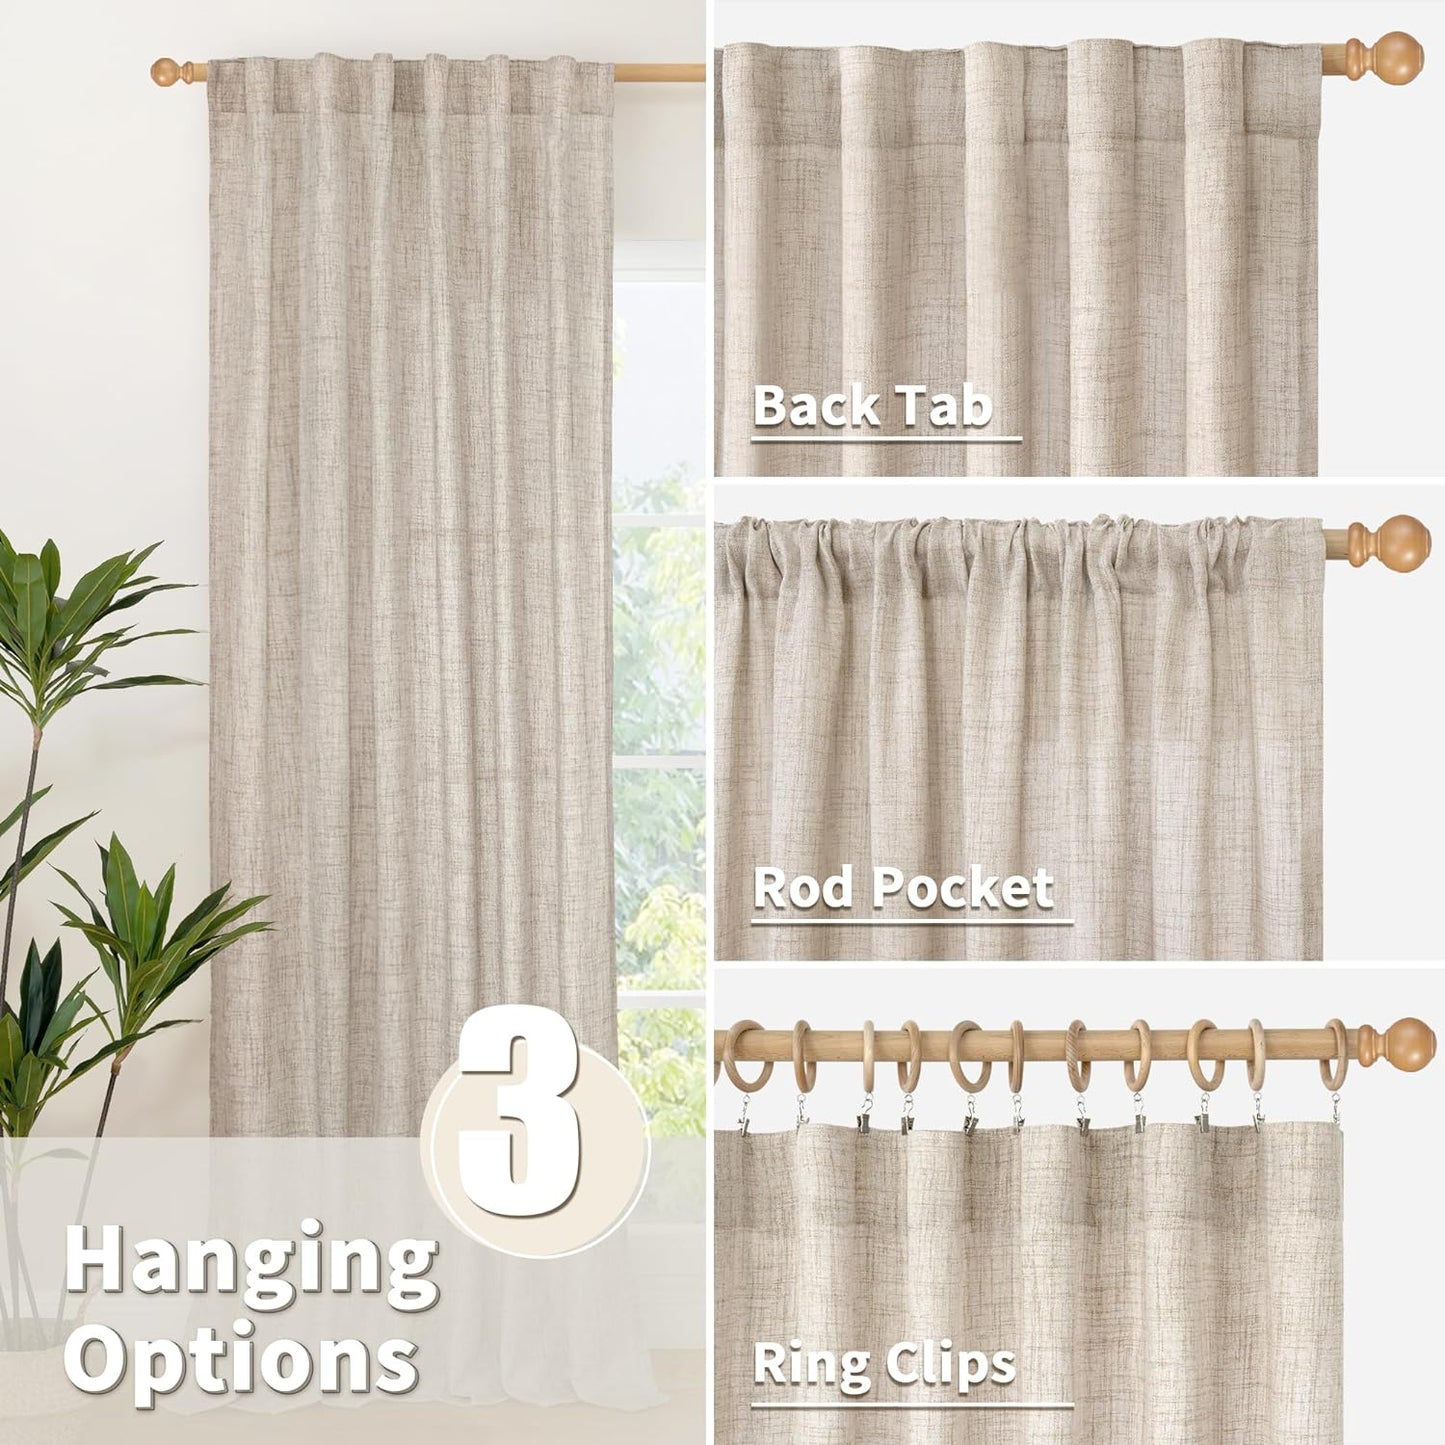 Youngstex Natural Linen Curtains 72 Inch Length 2 Panels for Living Room Light Filtering Textured Window Drapes for Bedroom Dining Office Back Tab Rod Pocket, 52 X 72 Inch  YoungsTex   